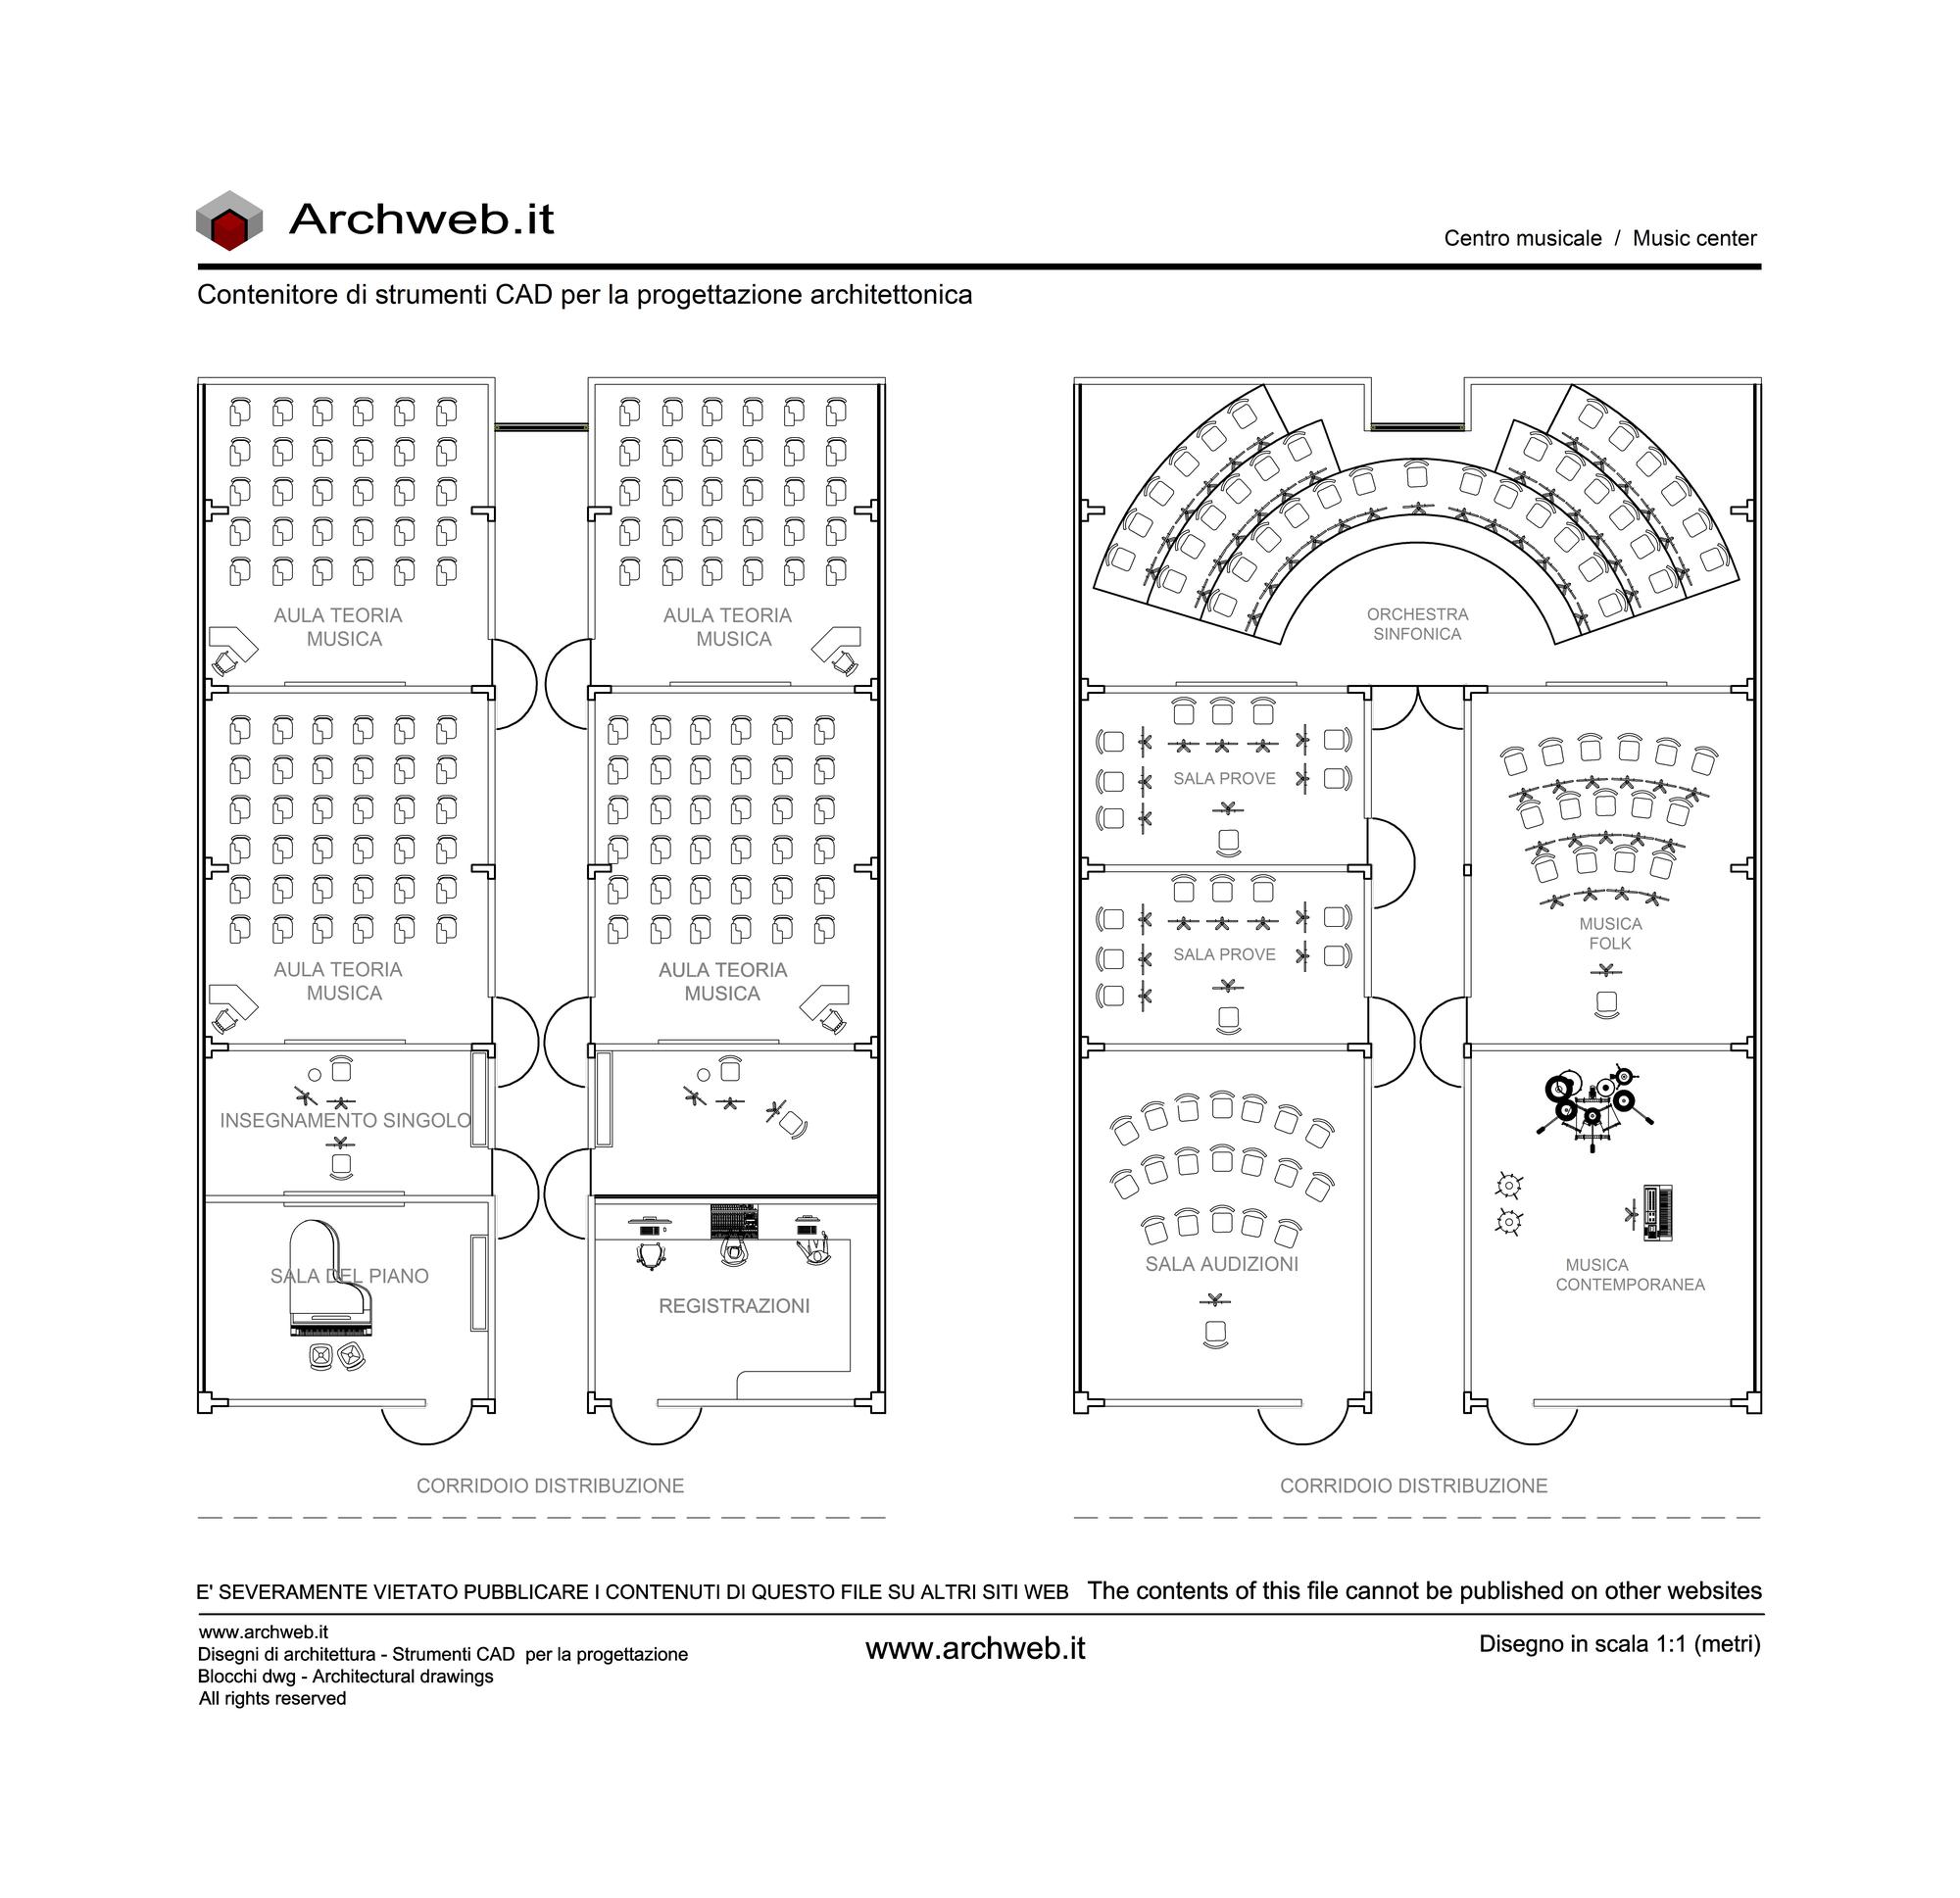 Plan music center 01 - 1:100 scale dwg drawing - Archweb